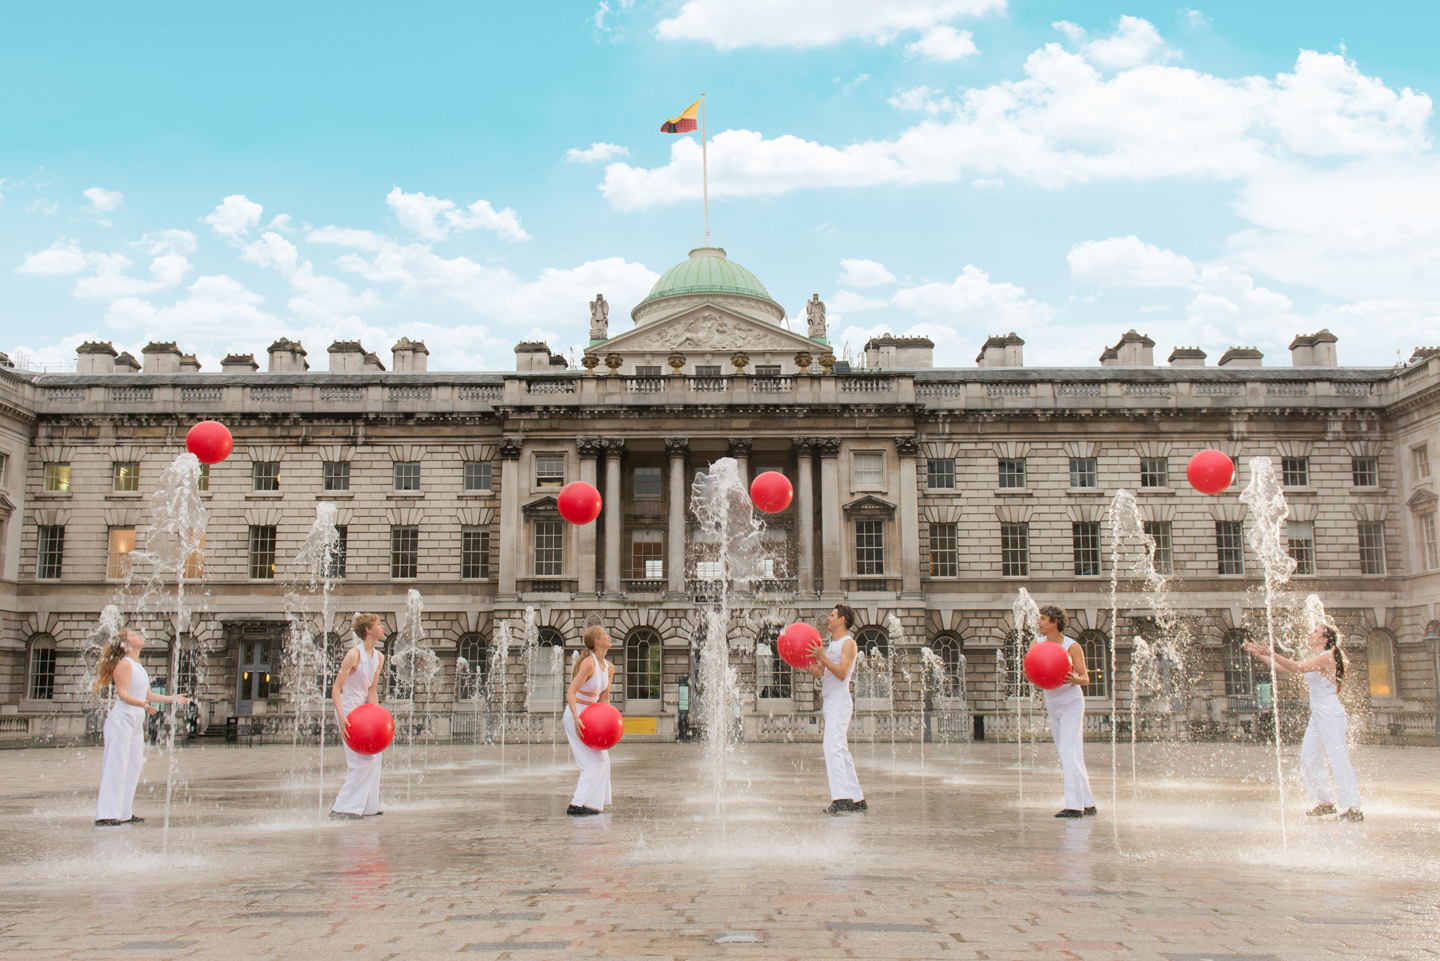 Summer at Somerset House.